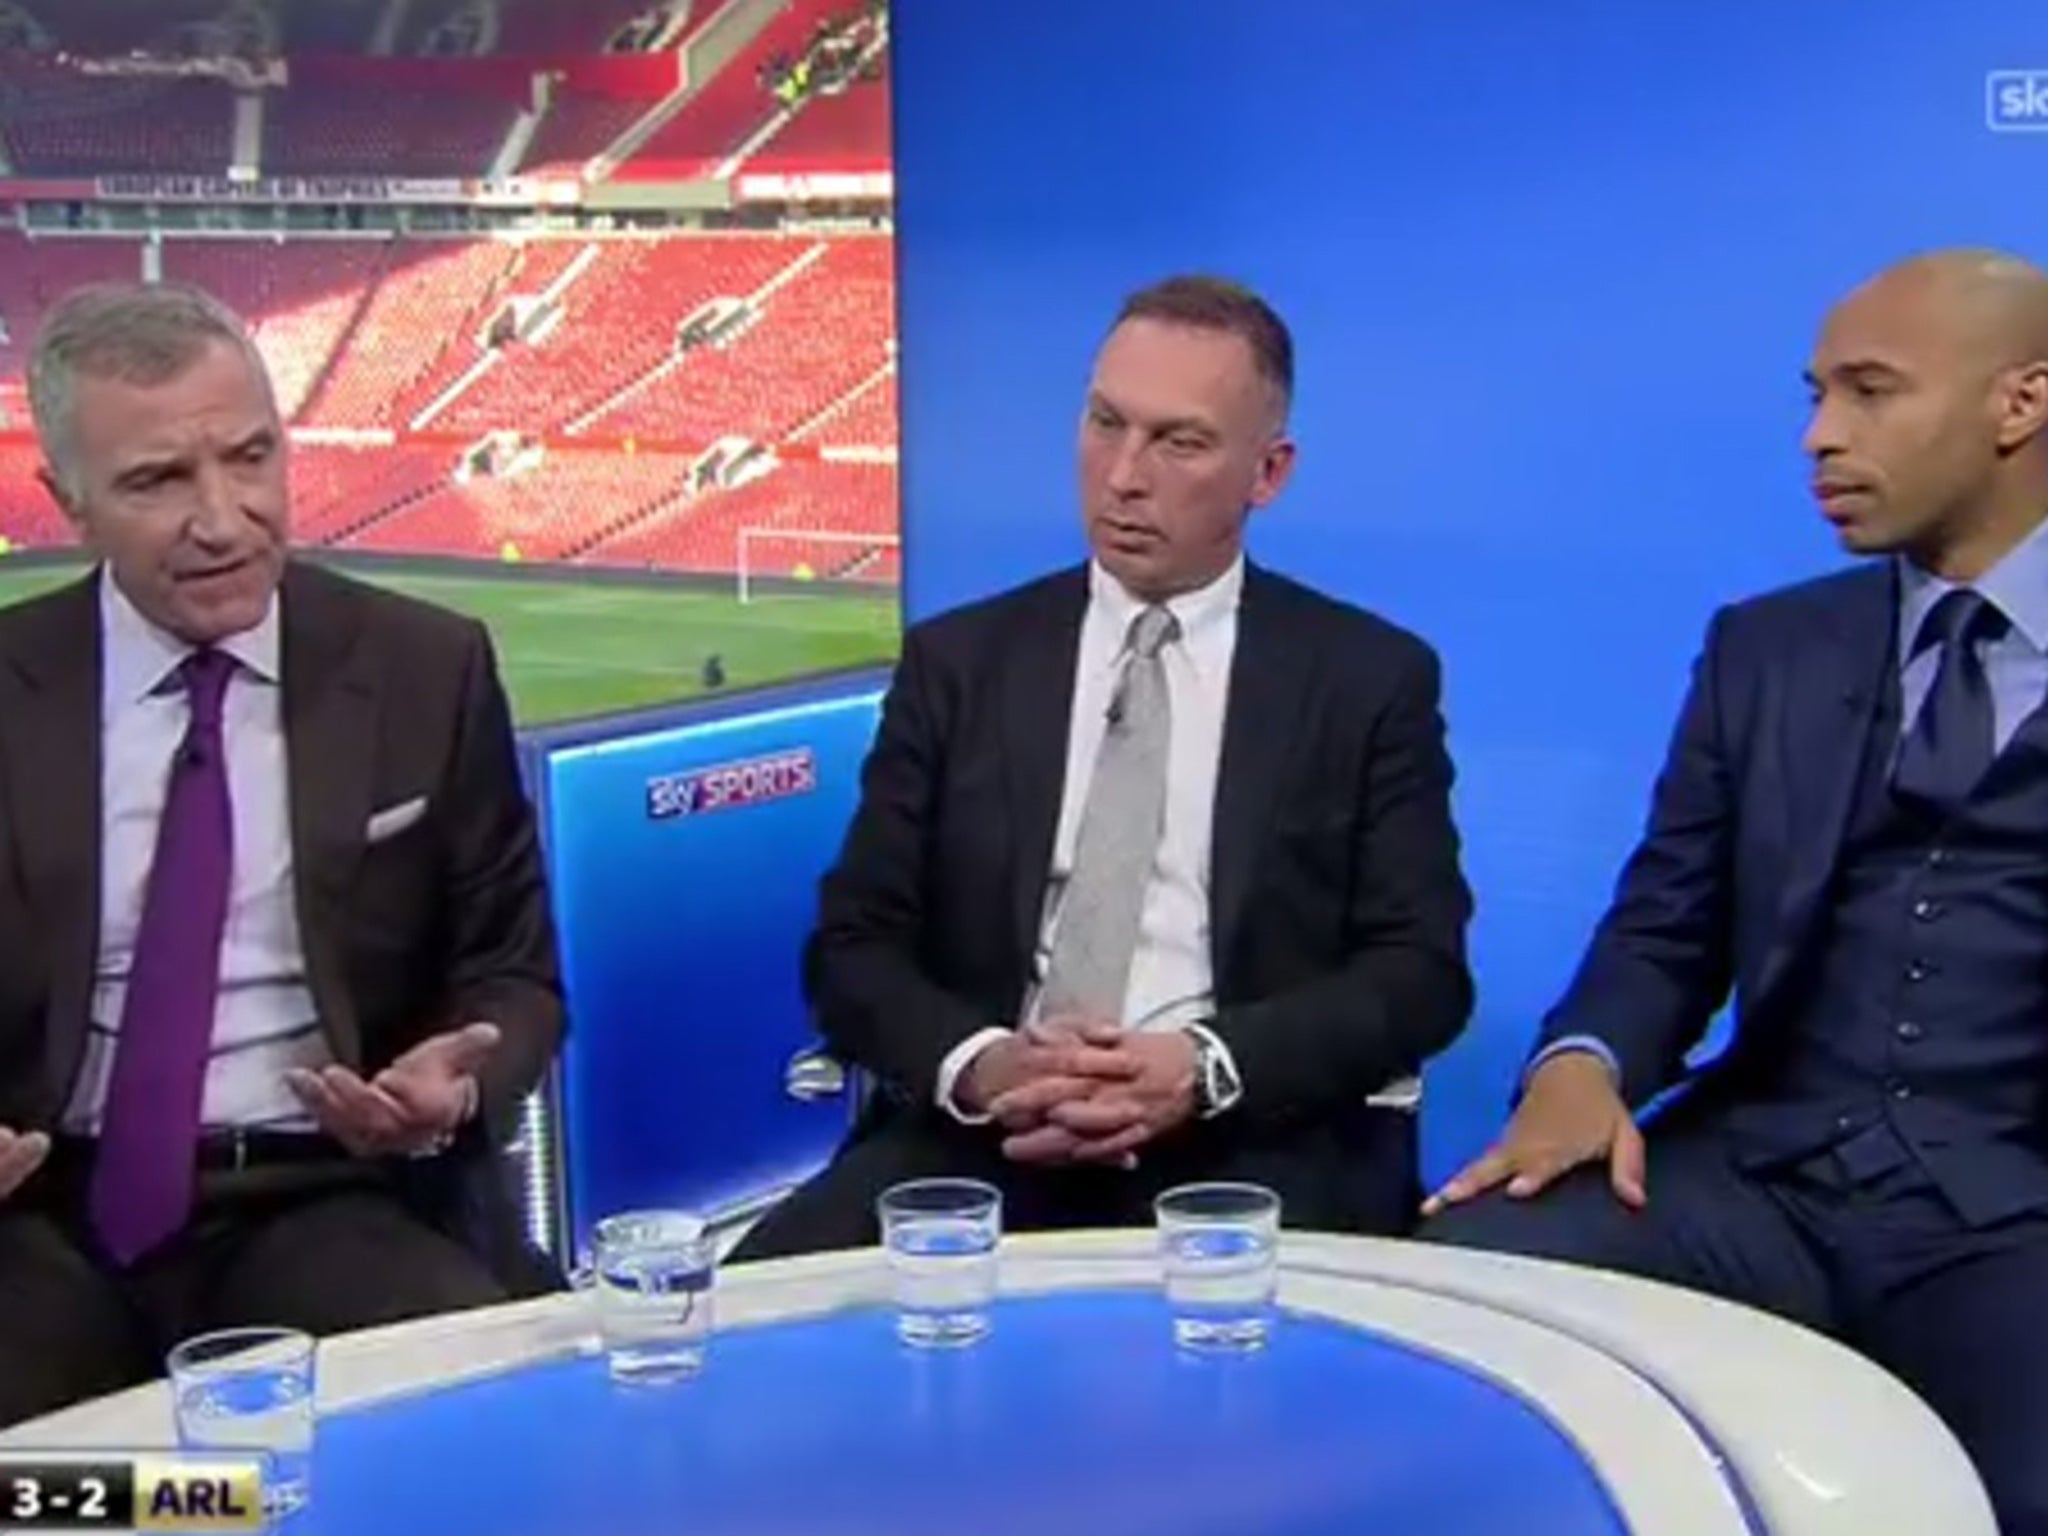 Graeme Souness in the Sky studio with David Platt and Thierry Henry